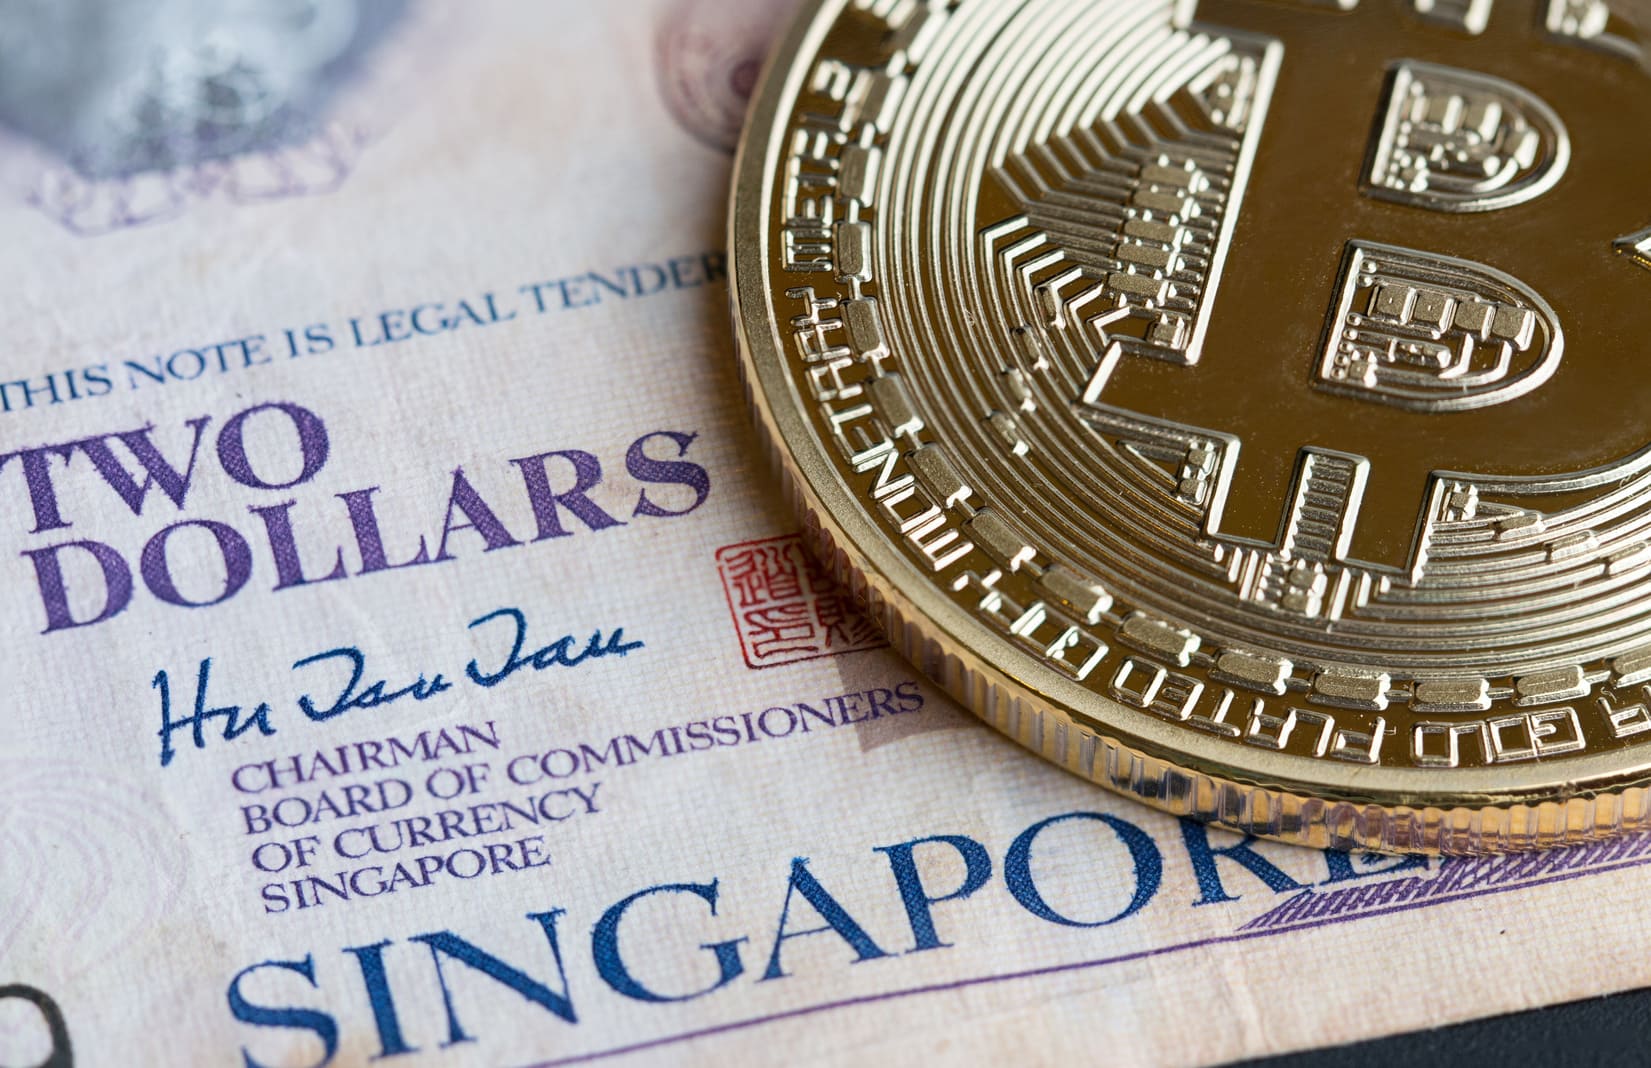 Singapore’s Monetary Authority to Pilot Use Cases in Digital Assets Initiative